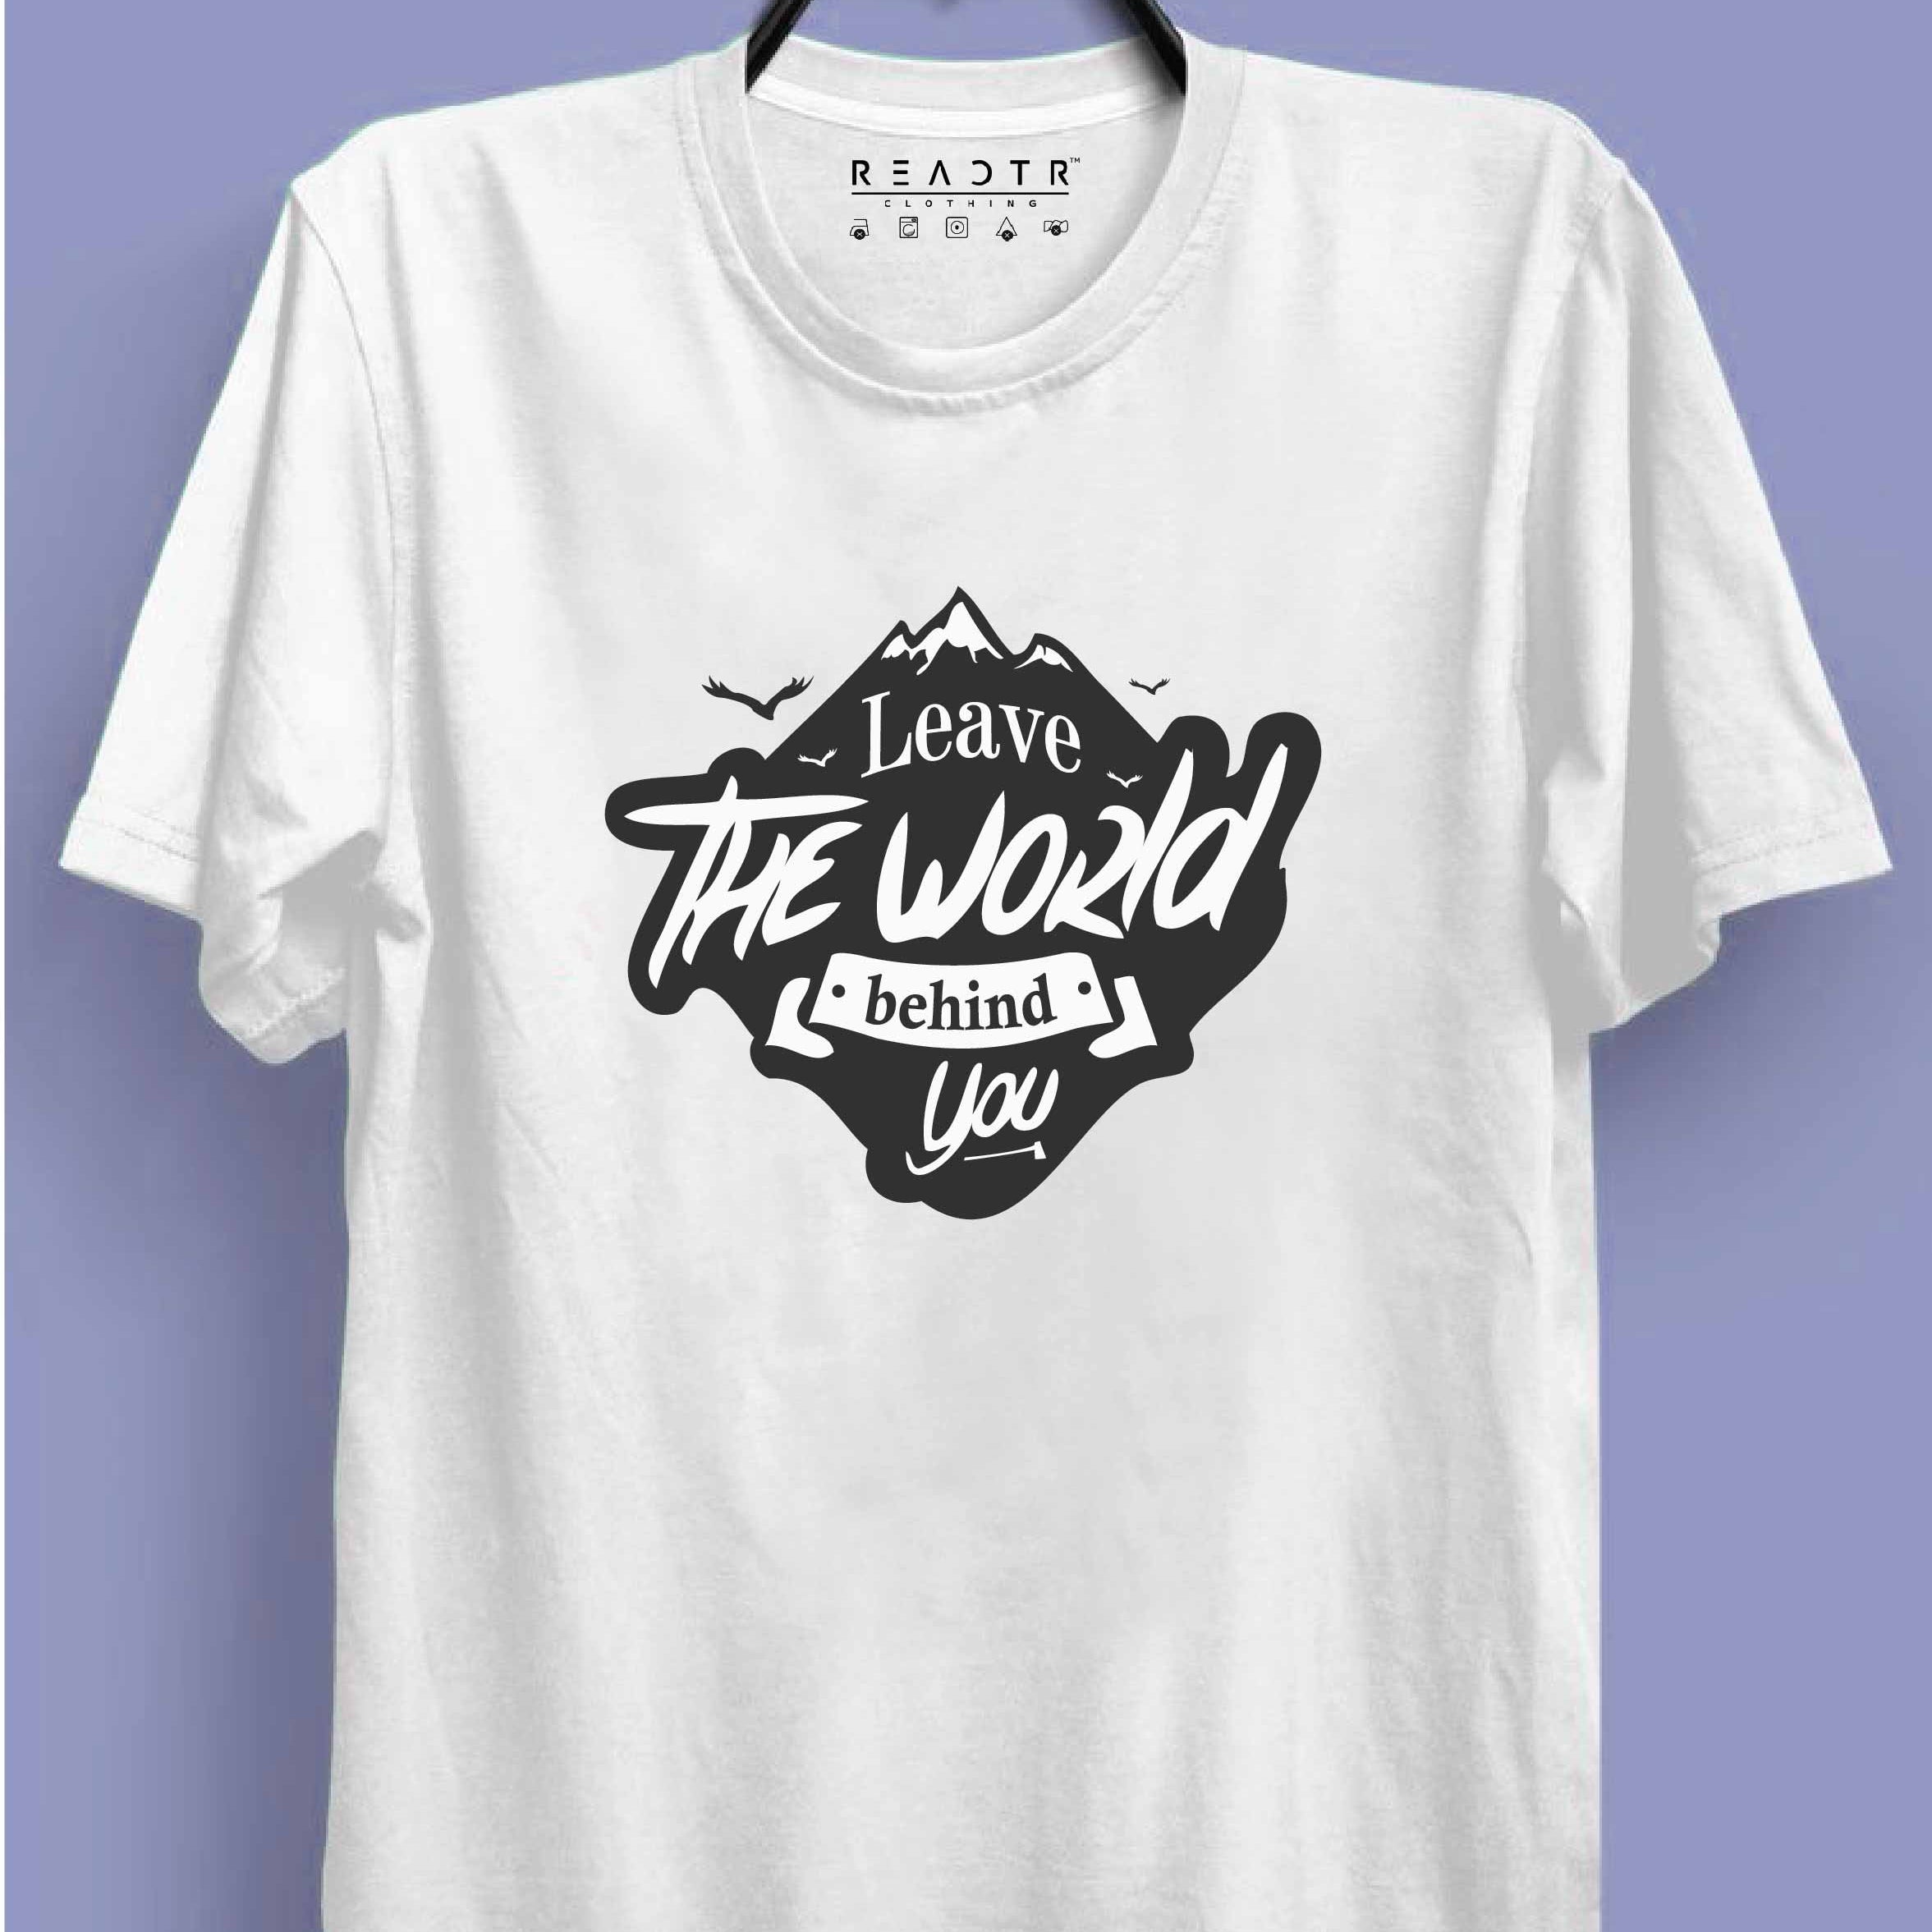 Leave The World Behind Reactr Tshirts For Men - Eyewearlabs